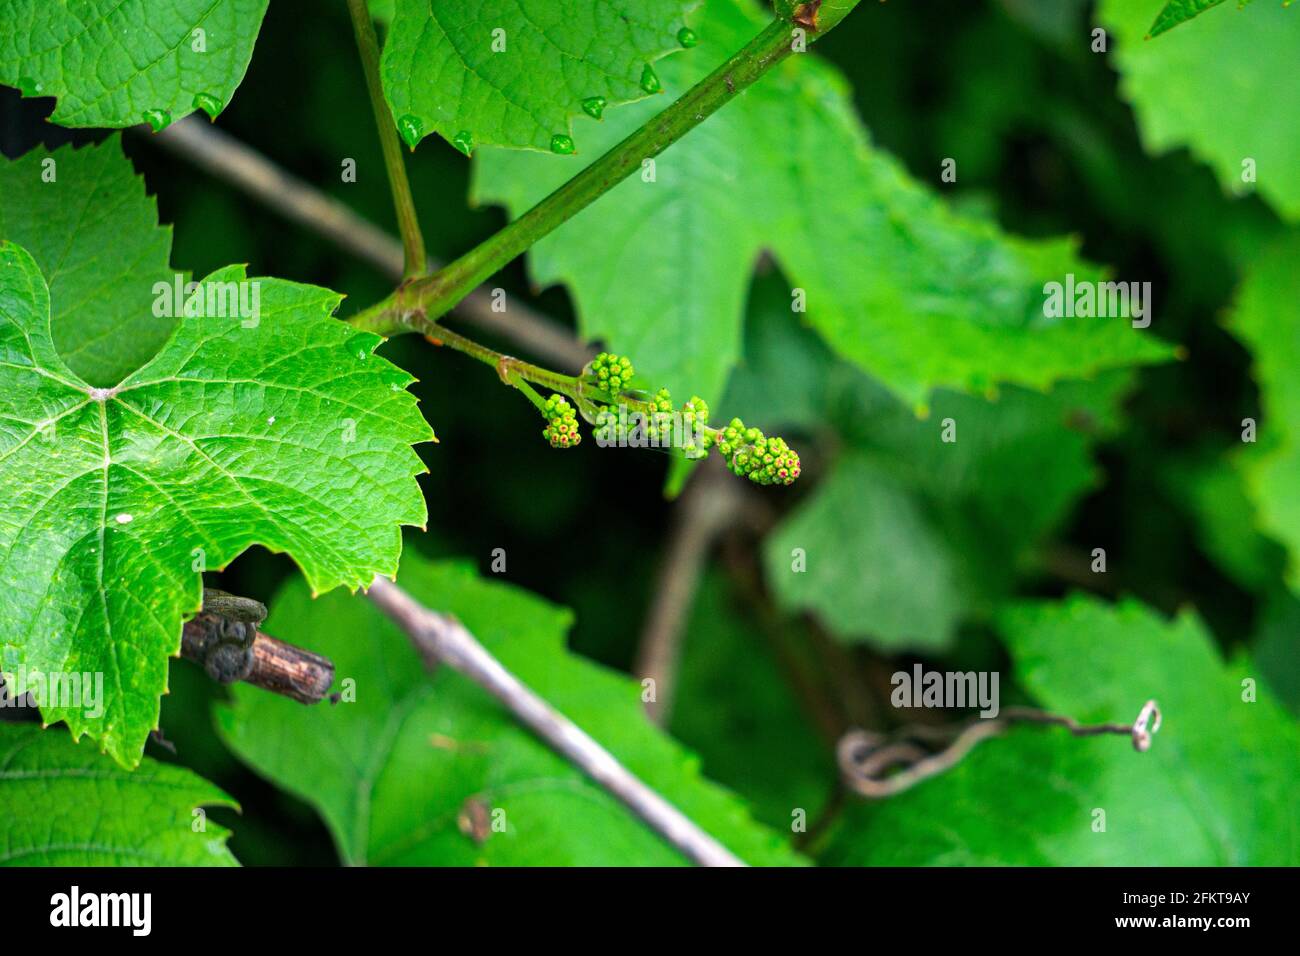 Blooming liana, green flowers of grapes, initial development of grapes. Stock Photo